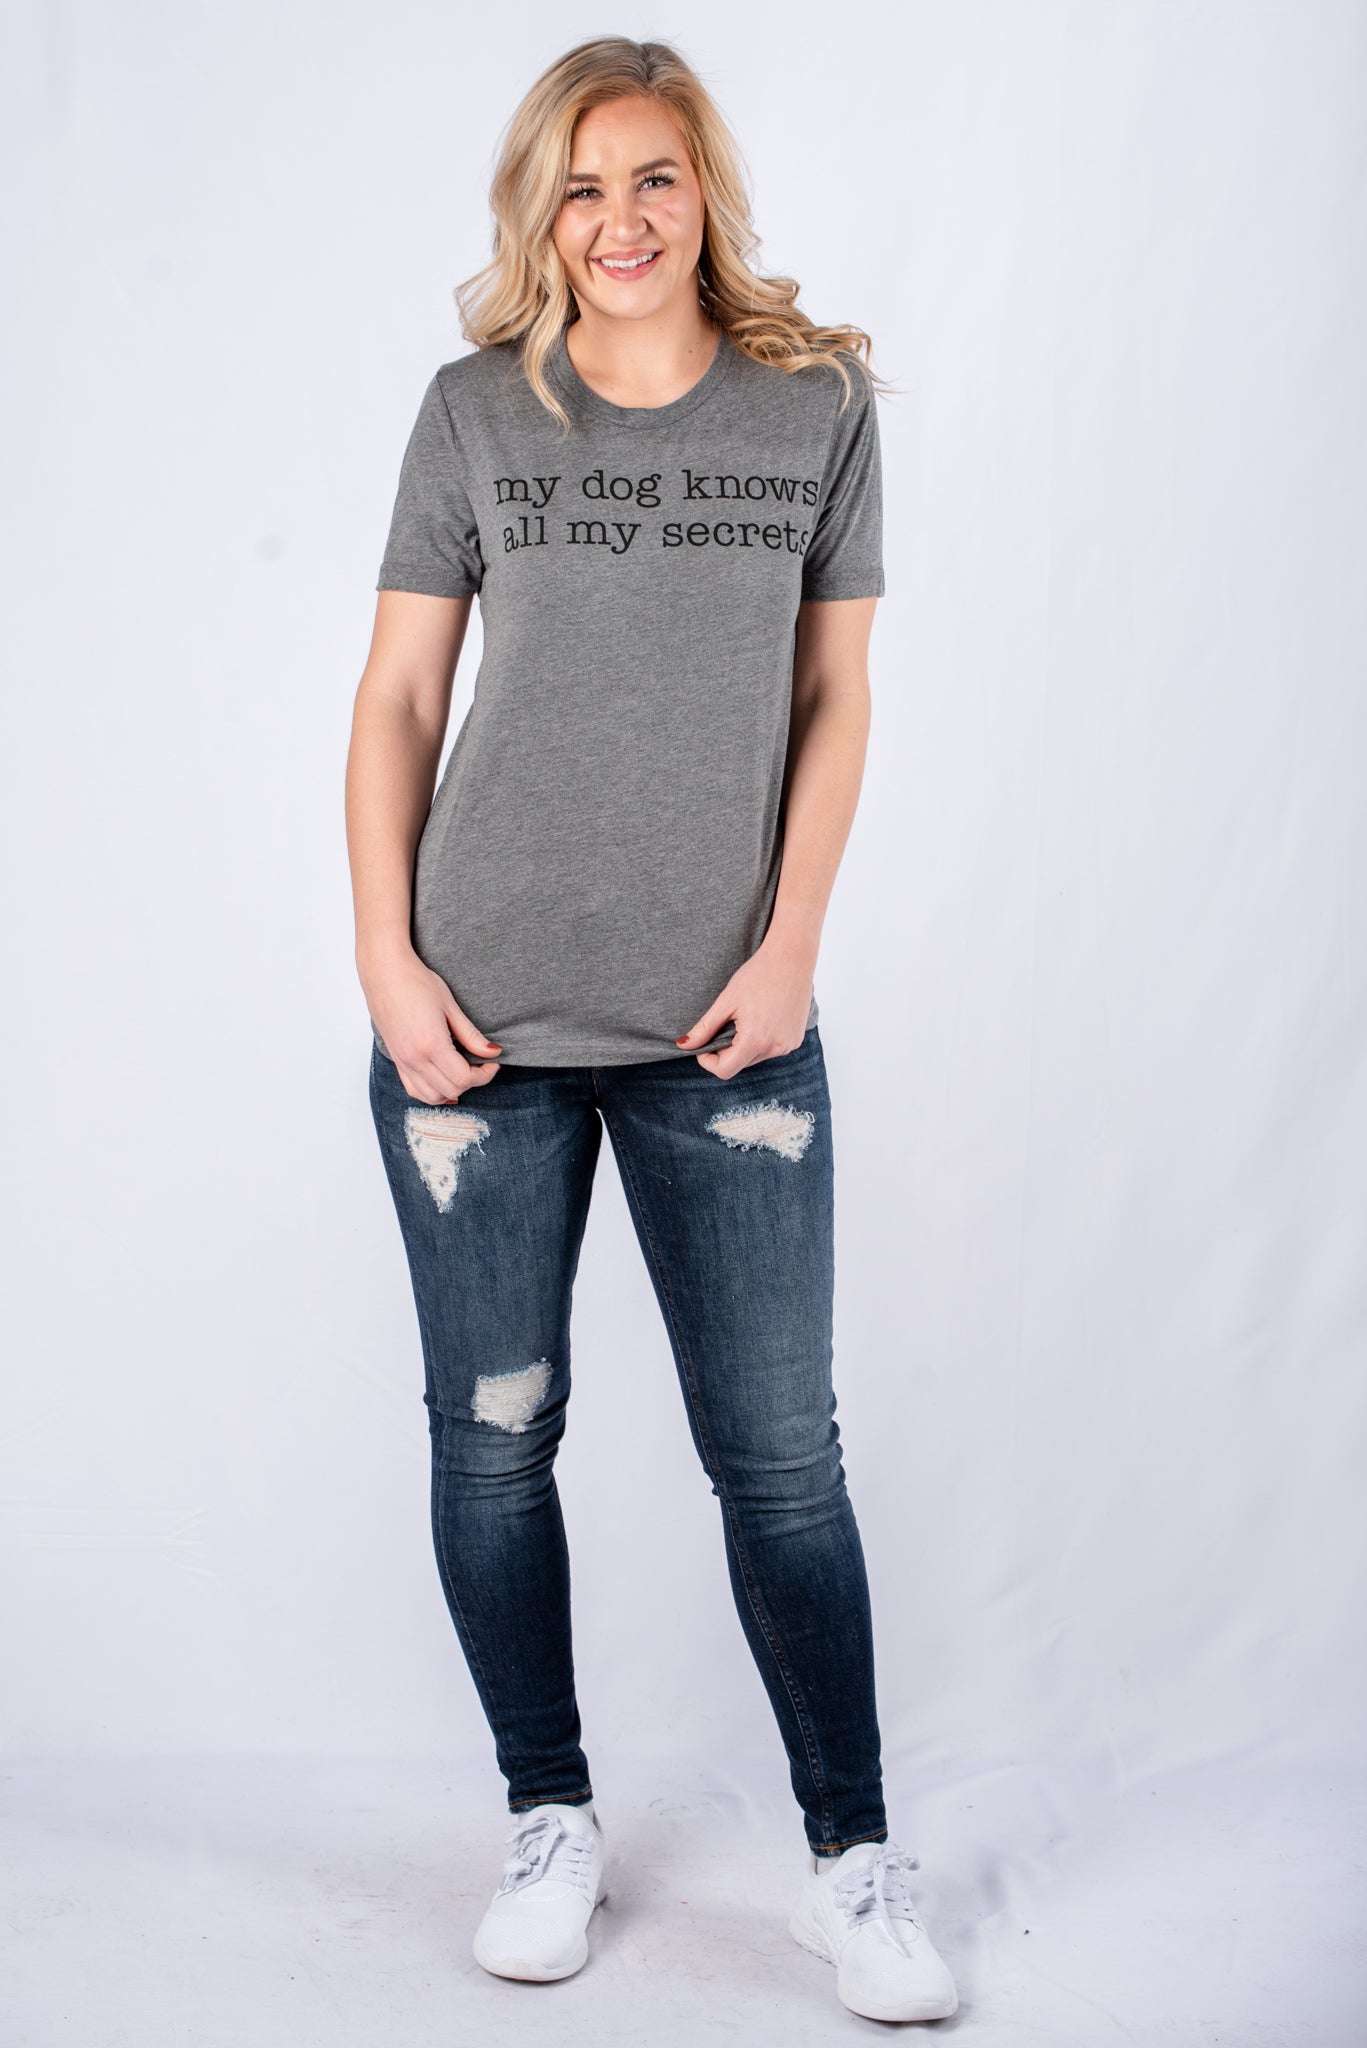 My dog knows all my secrets unisex short sleeve t-shirt grey - Trendy T-shirts - Cute Graphic Tee Fashion at Lush Fashion Lounge Boutique in Oklahoma